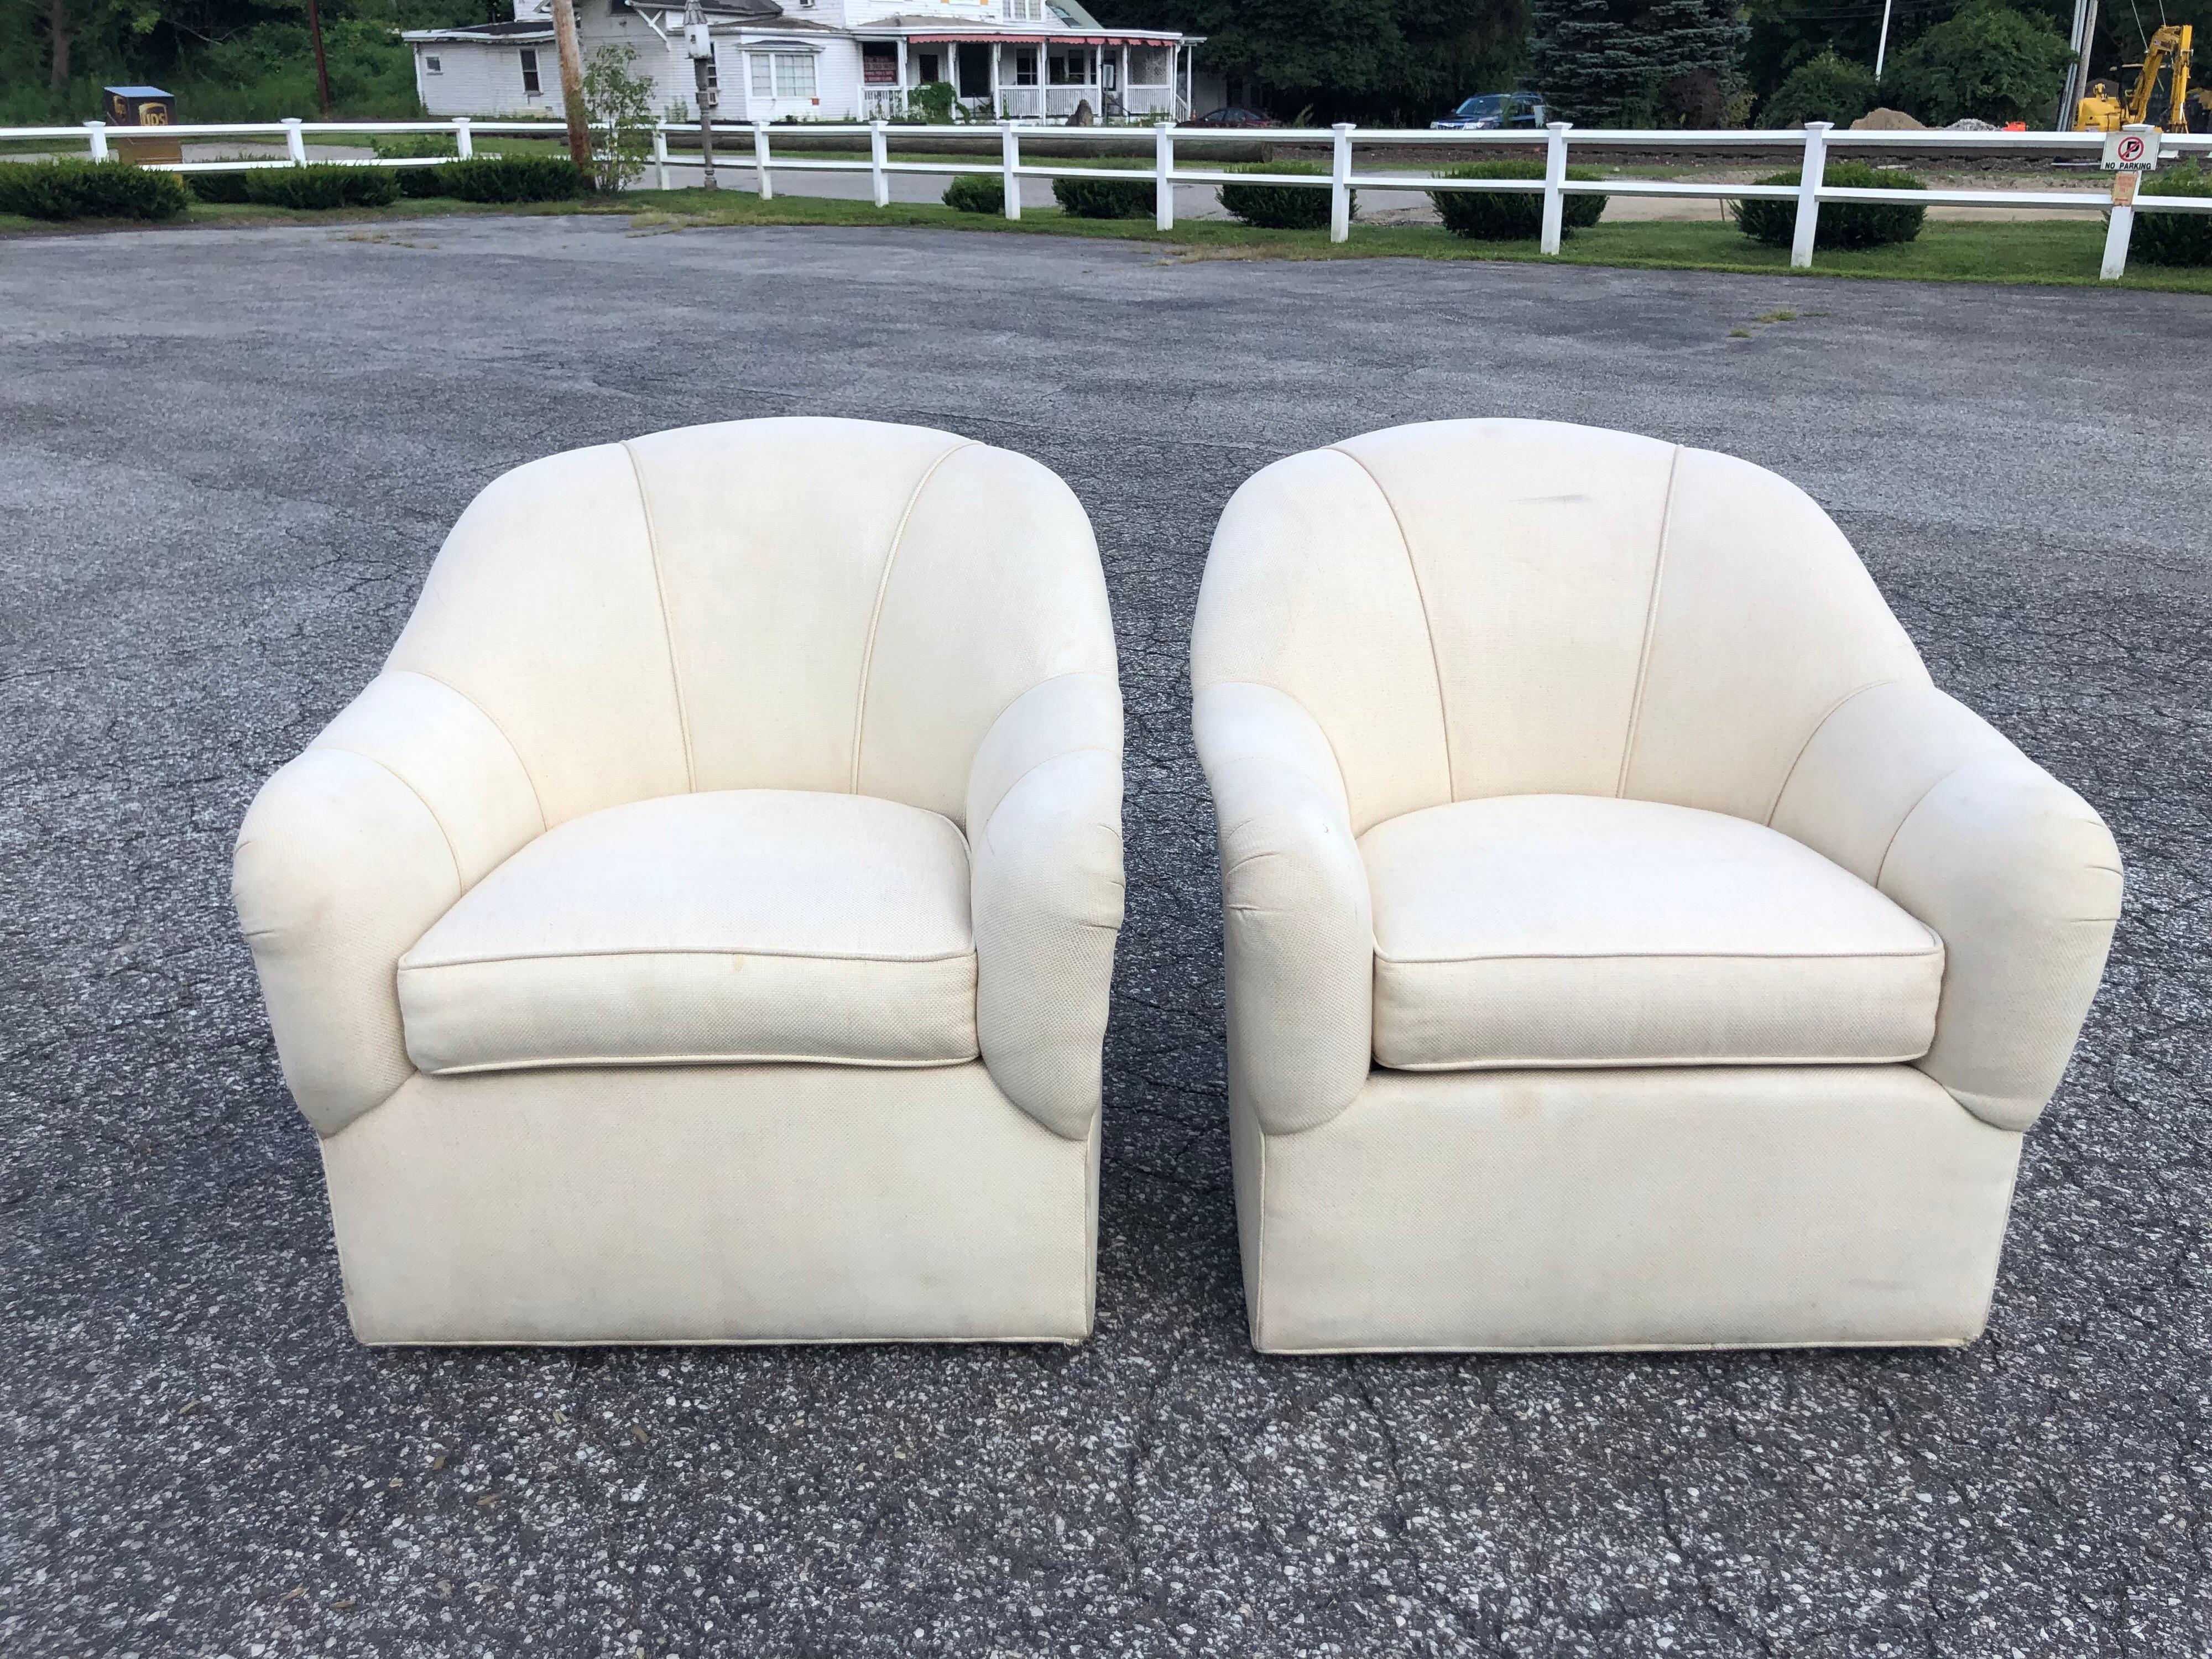 Pair of Ethan Allen Linen swivel club chairs. Perfect, comfortable swivel lounge chairs.
Off-white linen. Light marks on upholstery. Either professionally clean or just recover. Rear piping of one chair is loose. Measures: Seat depth 20